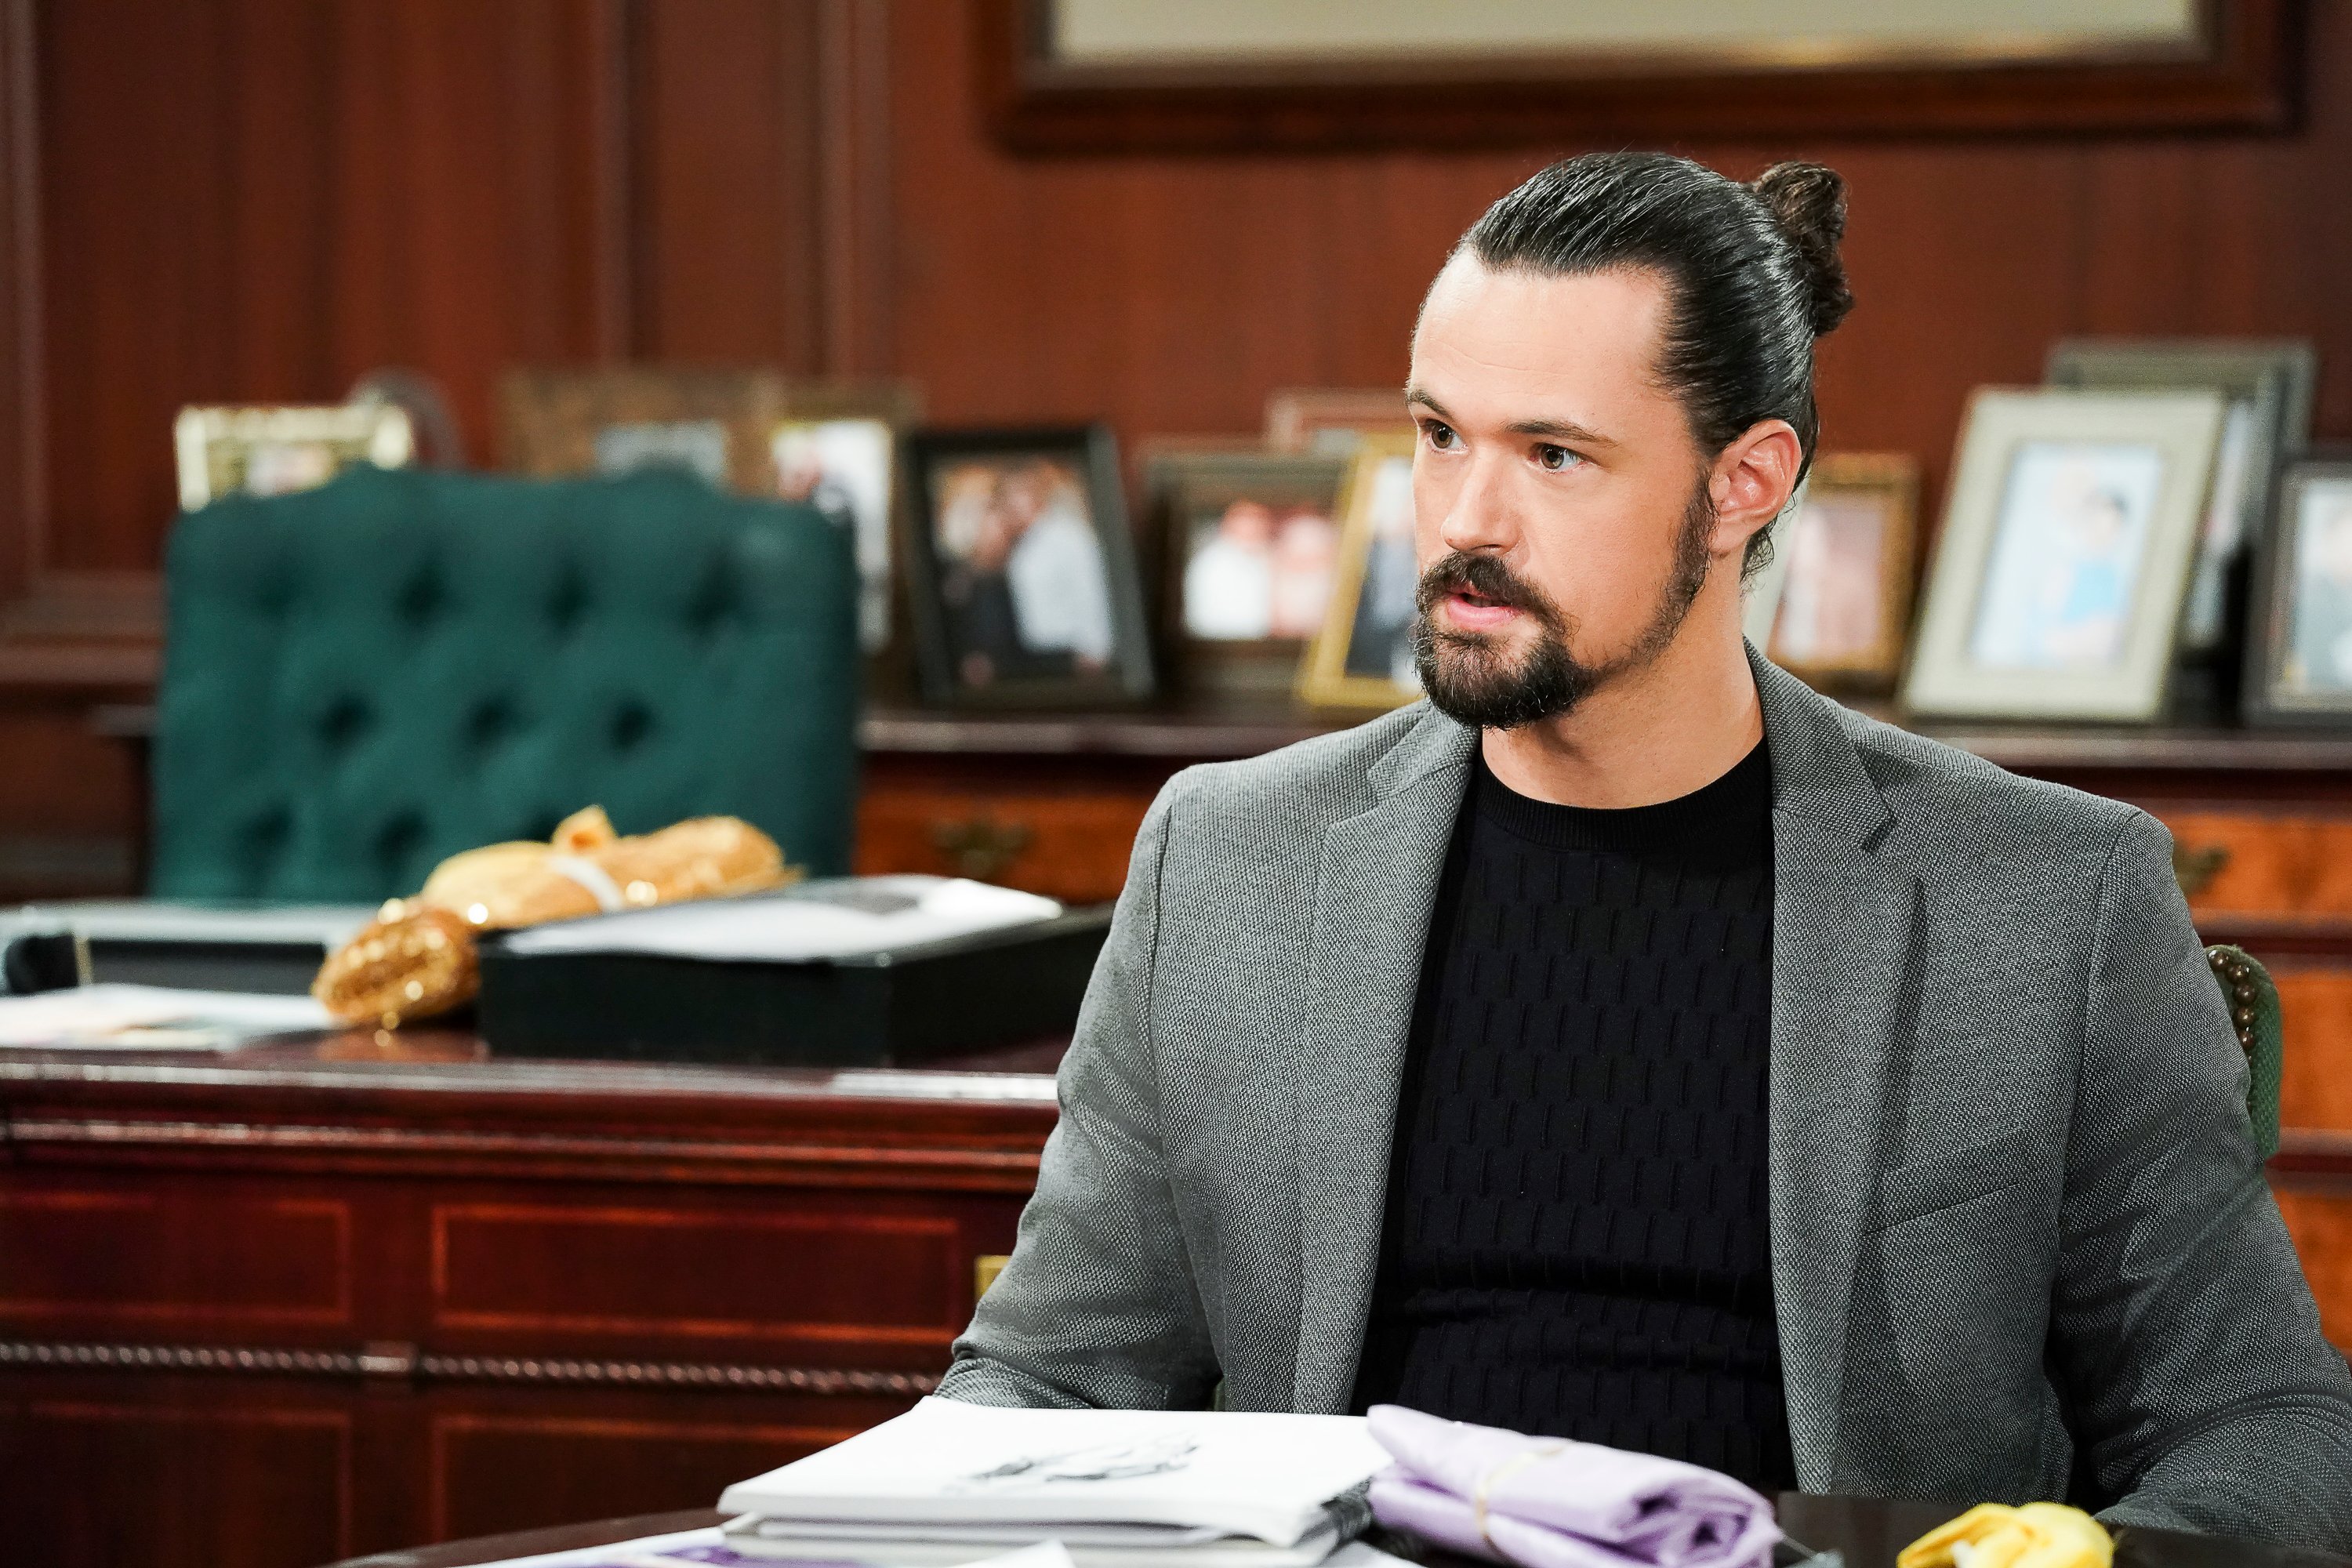 'The Bold and the Beautiful' spoilers reveal Thomas Forrester will get his son back.